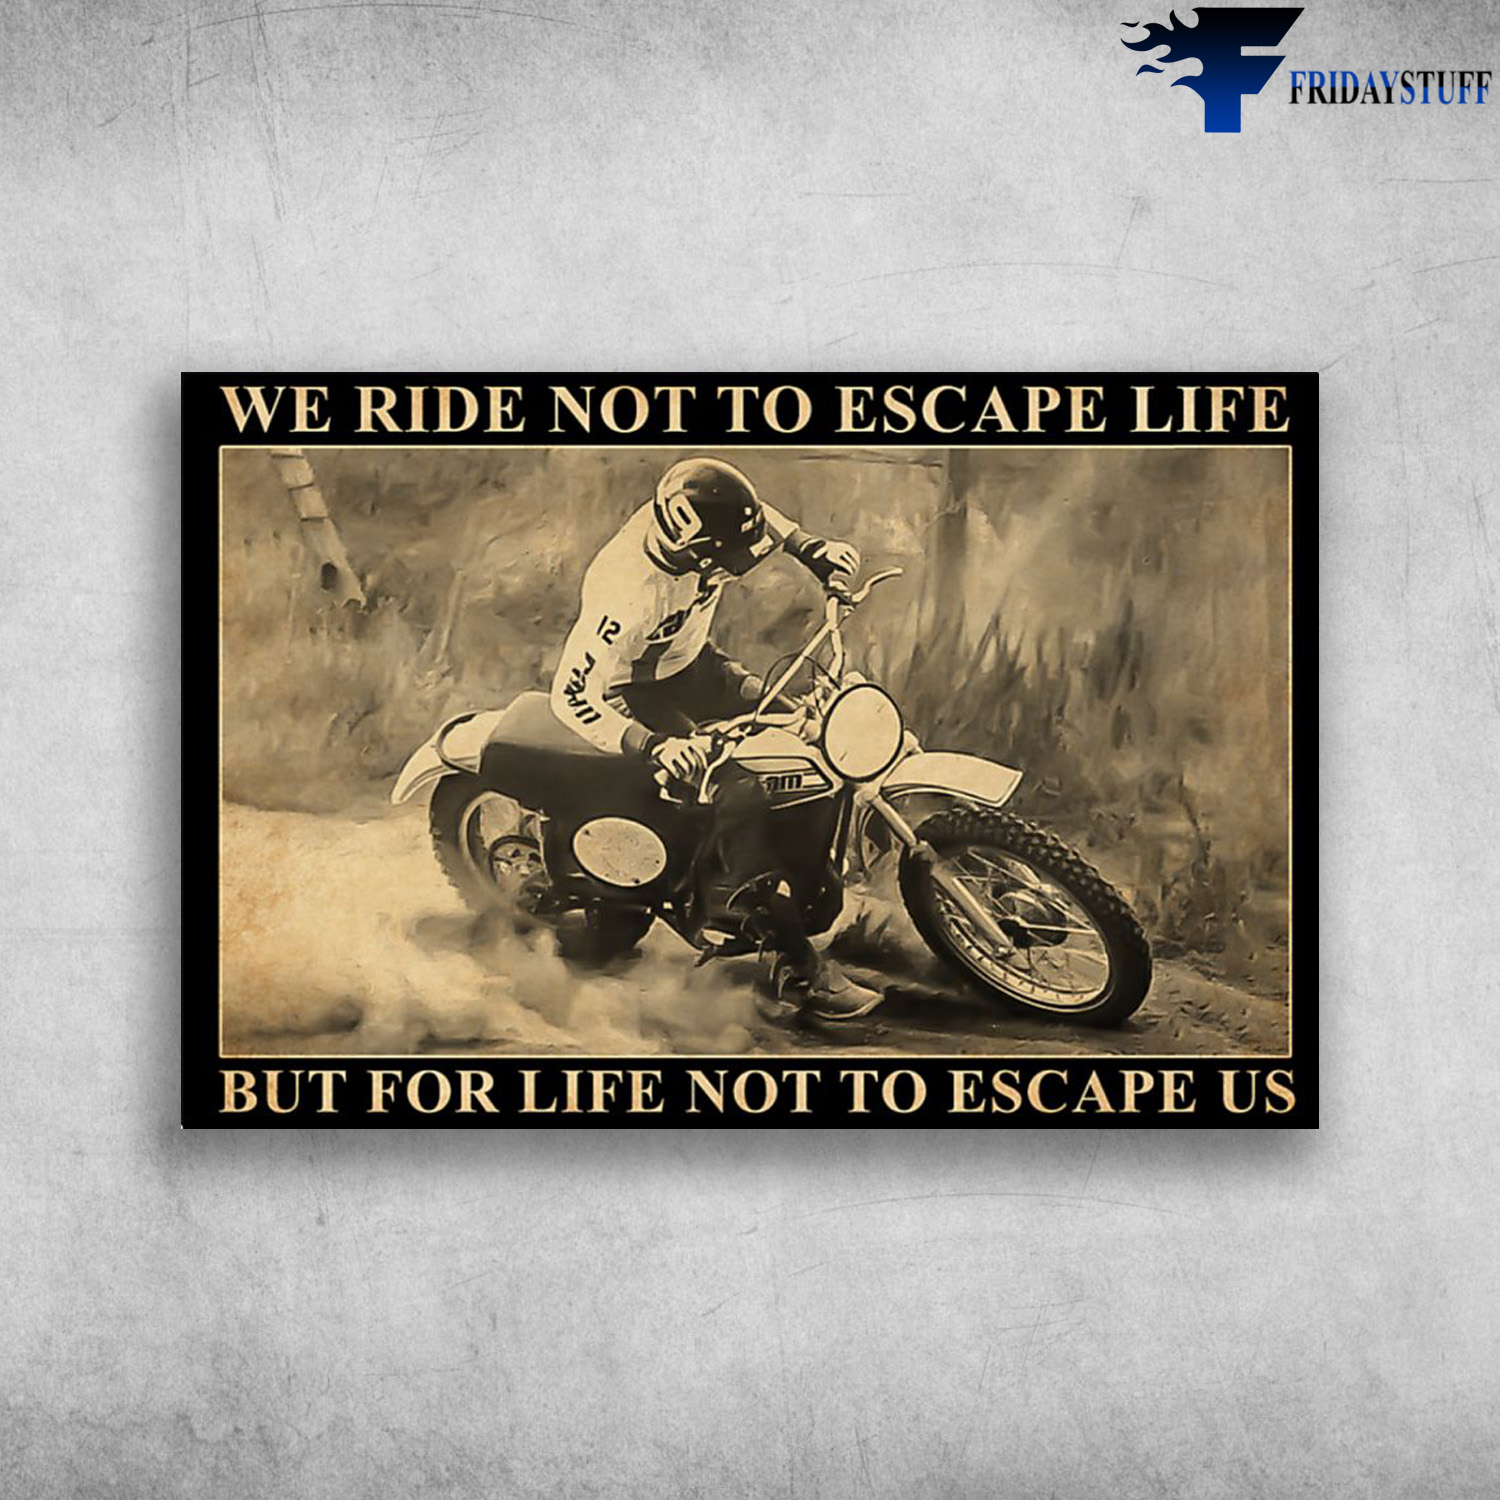 Motocross Man - We Ride Not To Escape Life, But For The Life Not To Escape Us